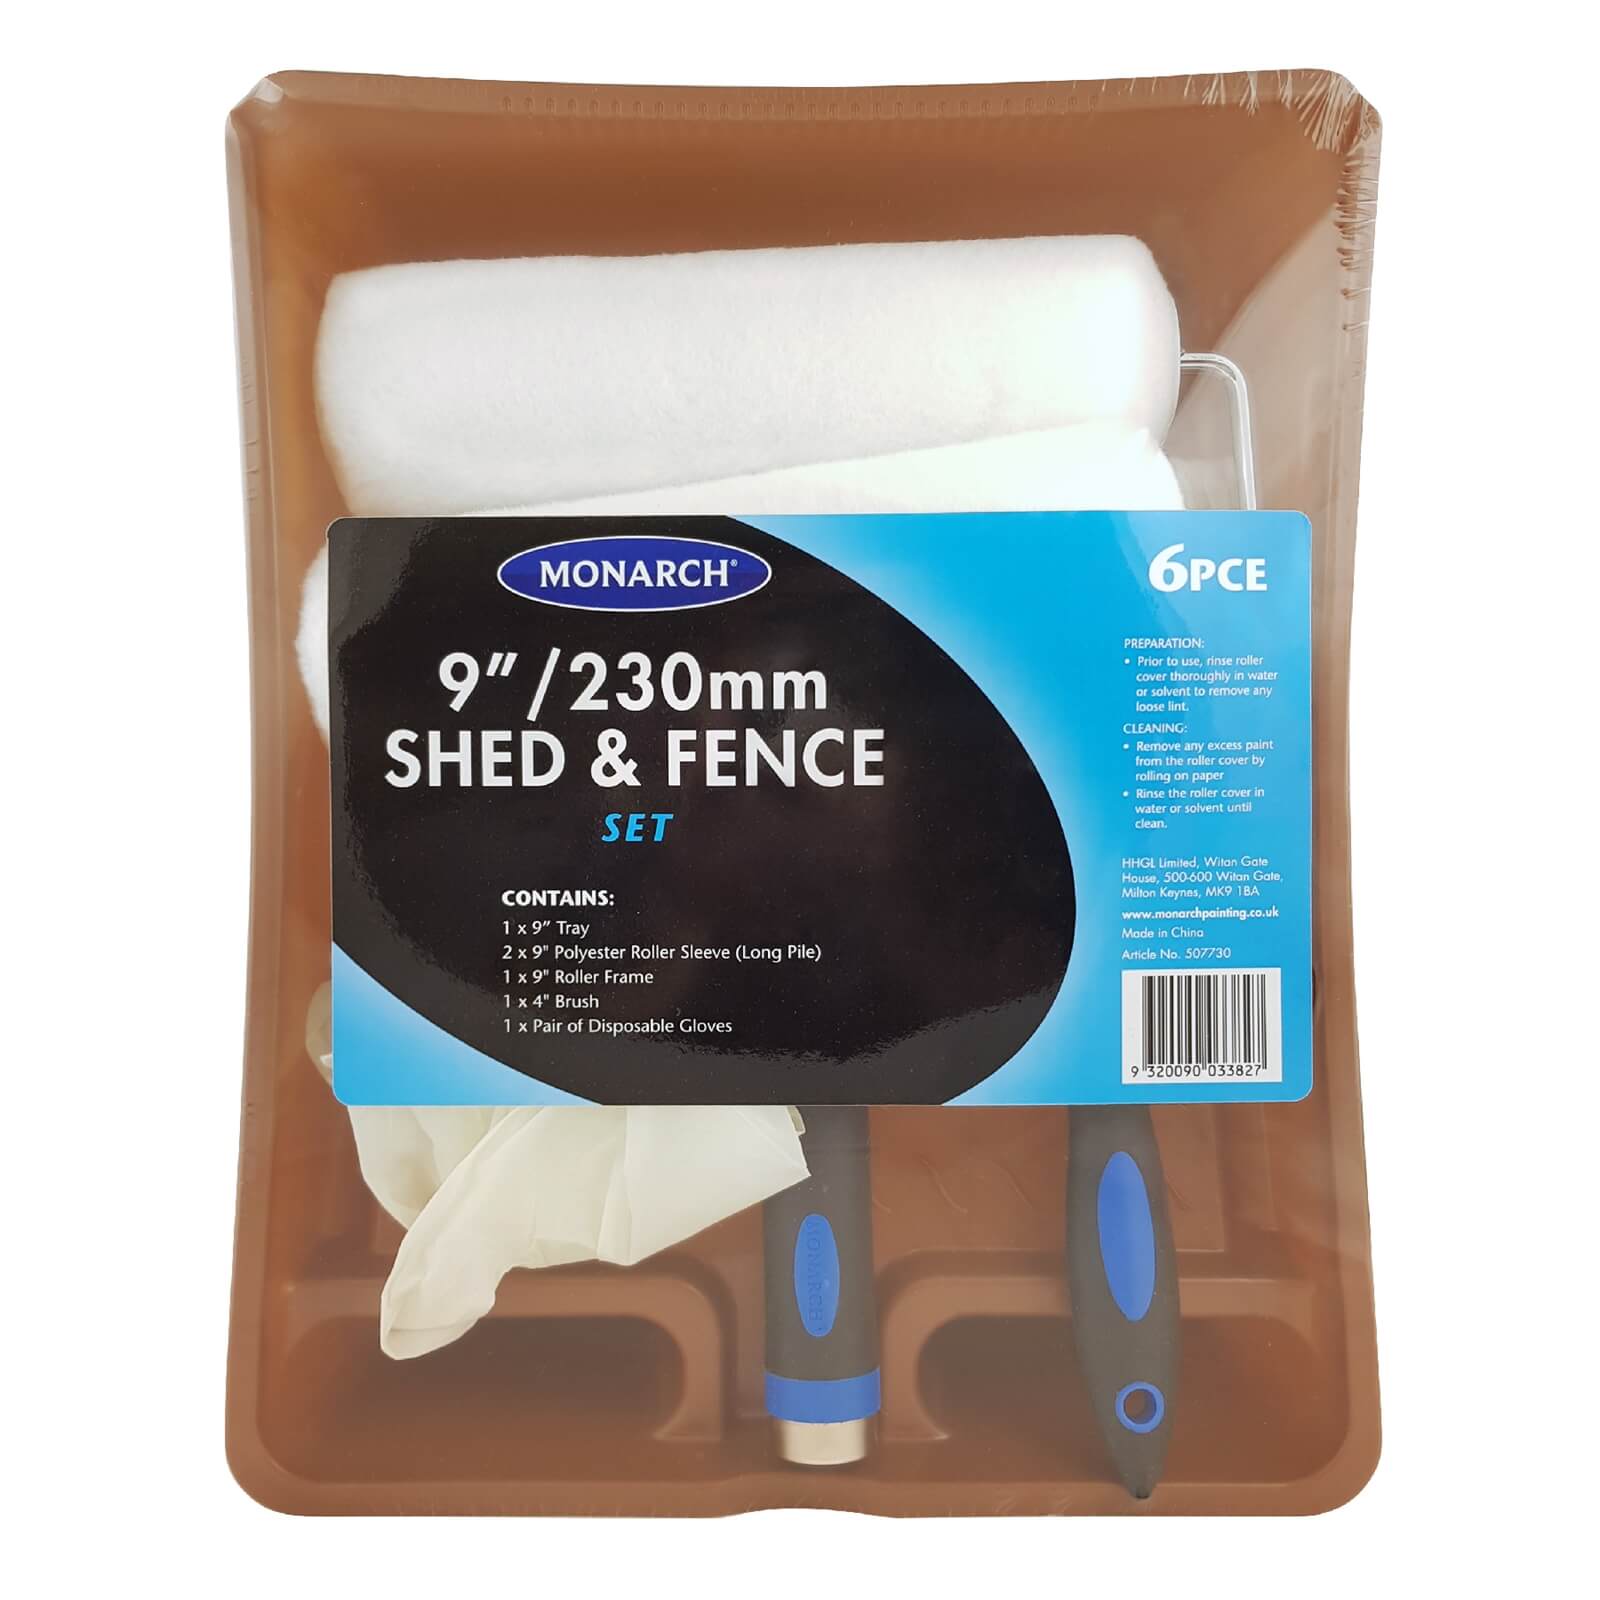 Monarch Shed & Fence Kit 9